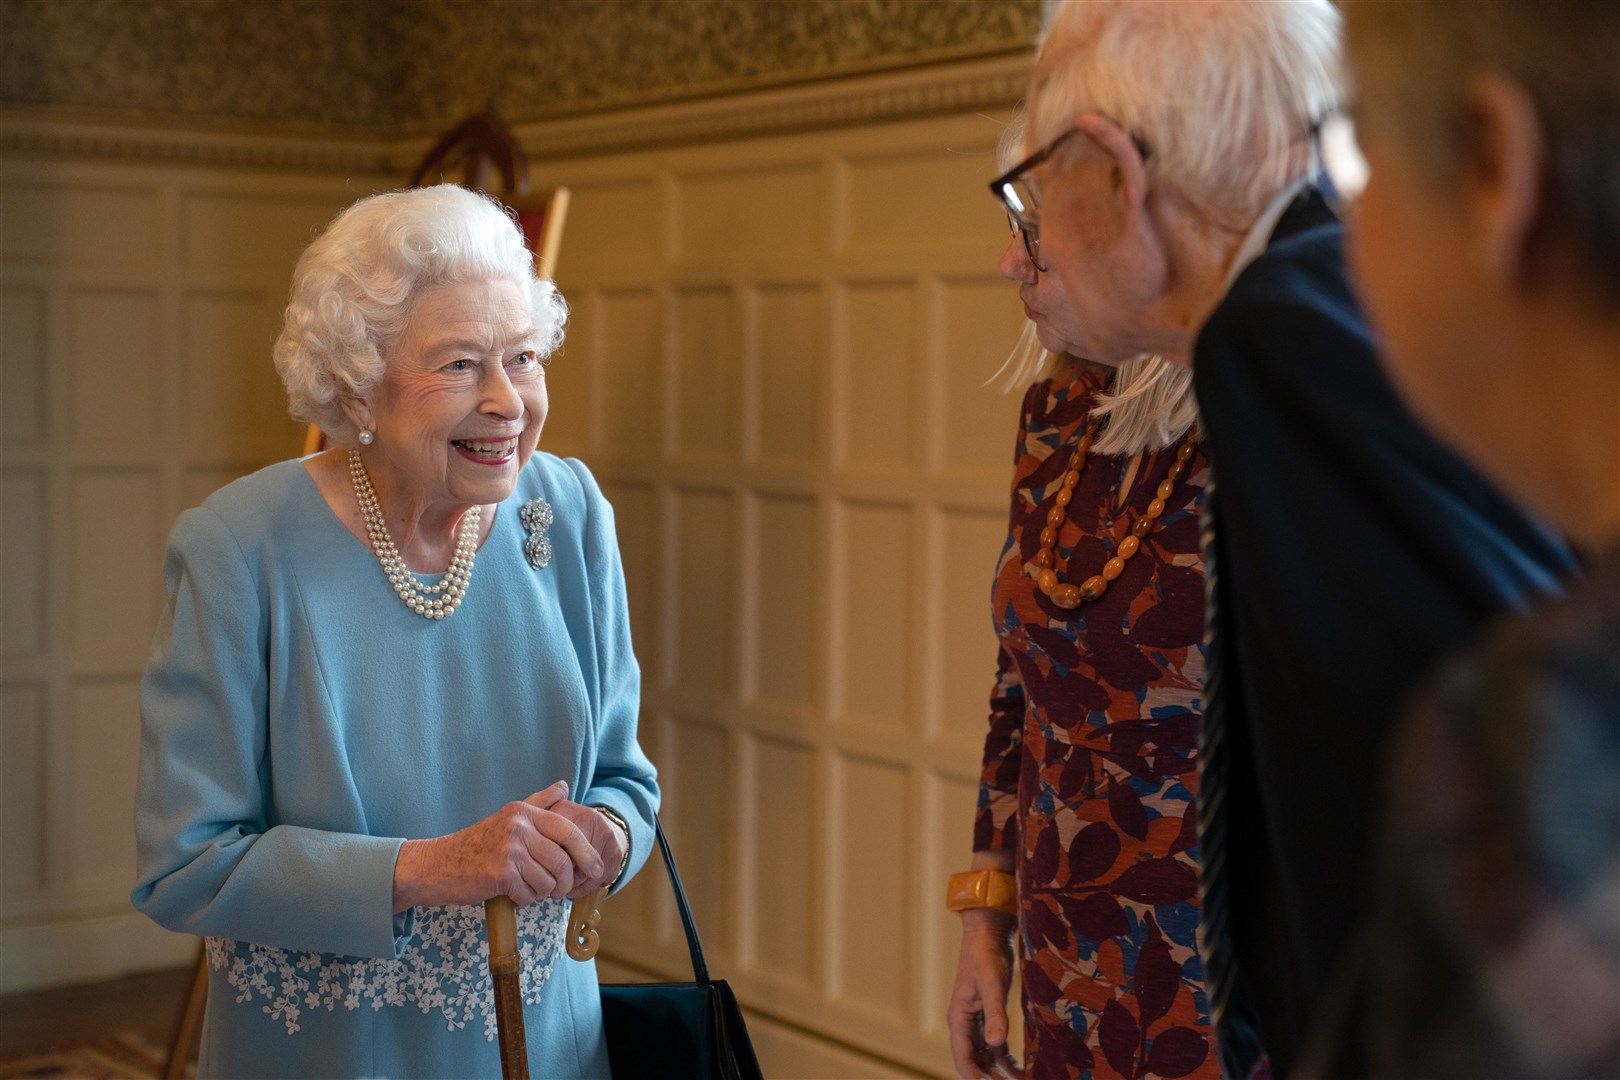 Although her schedule was not quite as busy as it once was, the Queen continued to have an active public life as she prepared to celebrate her Platinum Jubilee. Here, she meets members of the West Norfolk Befriending Society at Sandringham in February (Joe Giddens/PA)